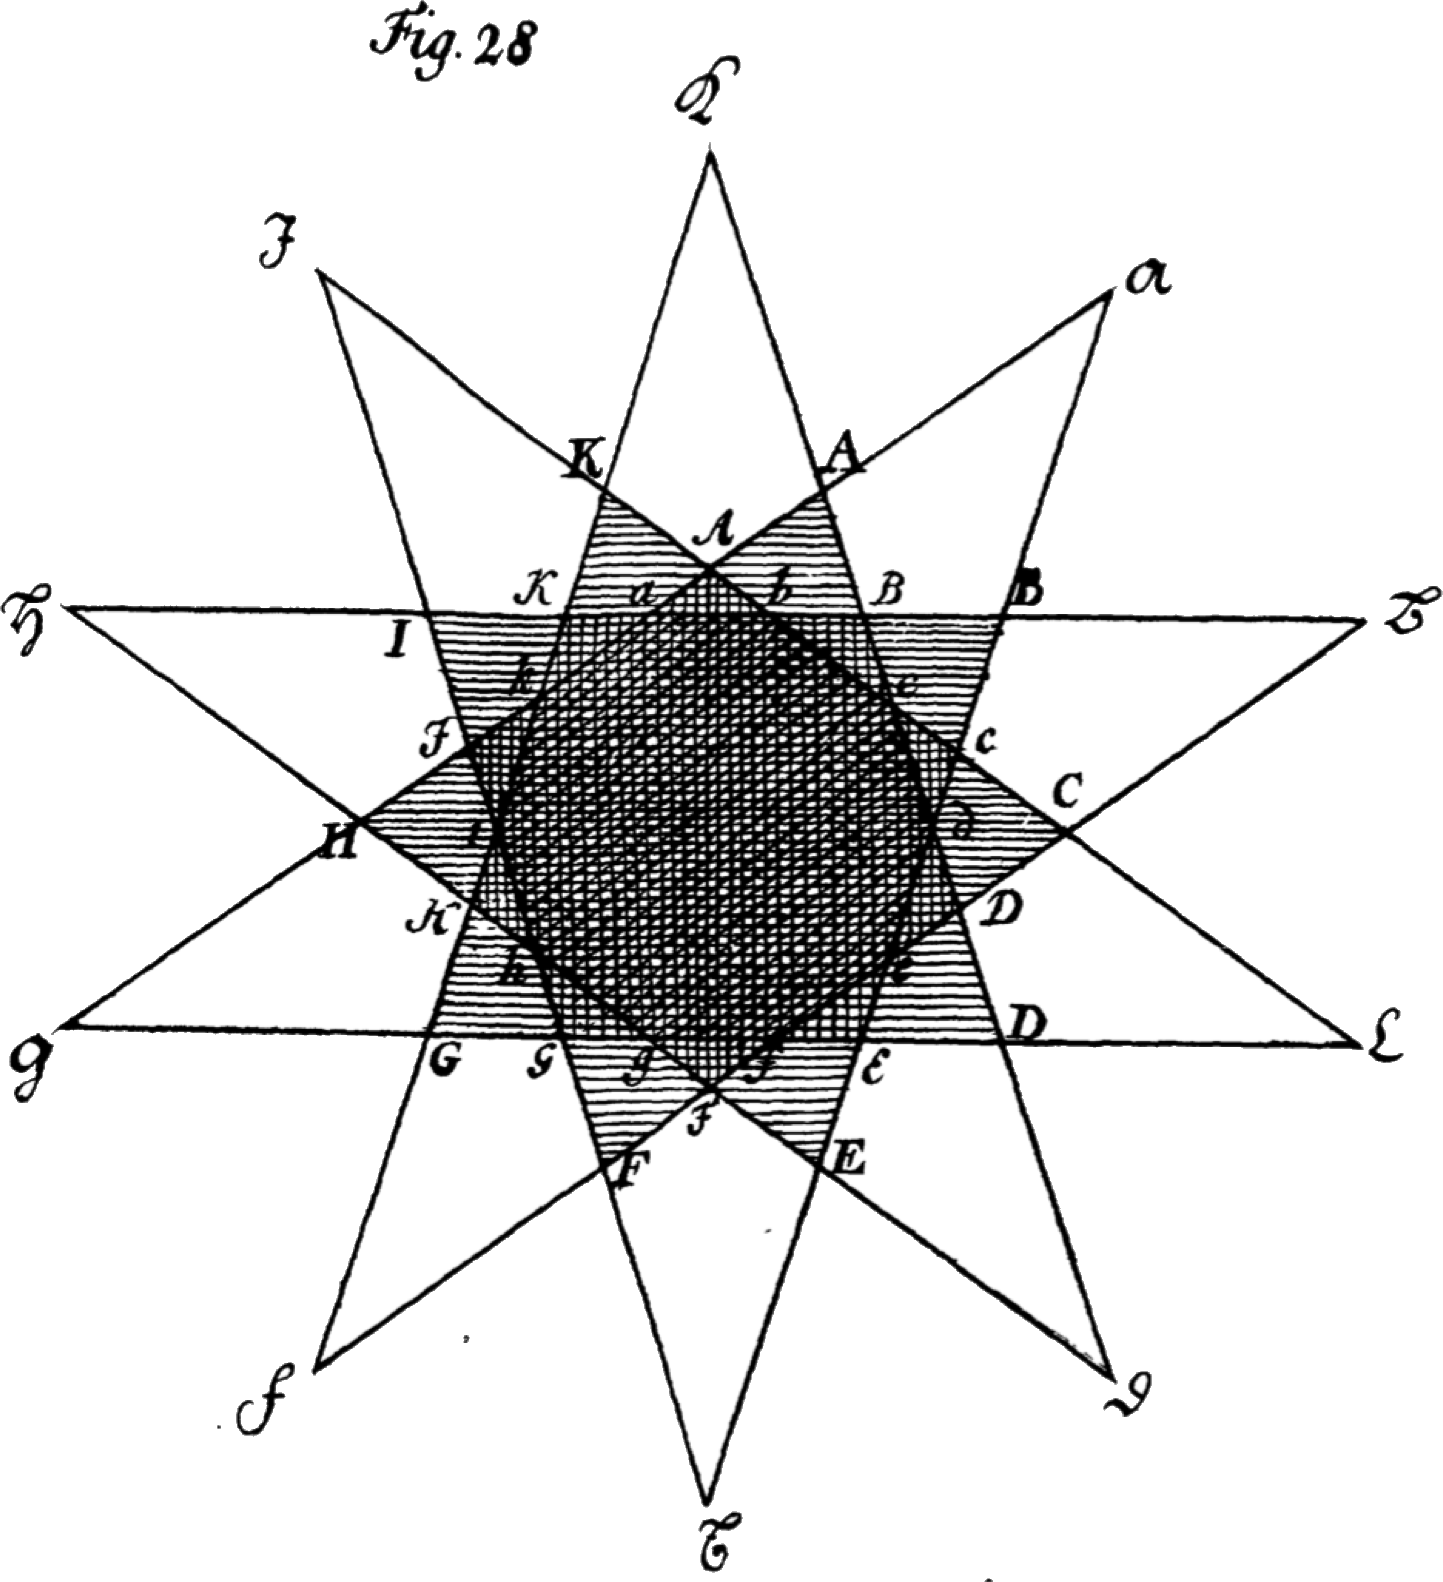 Another non-simple polygon from Meister, with winding numbers indicated by shading (1785)